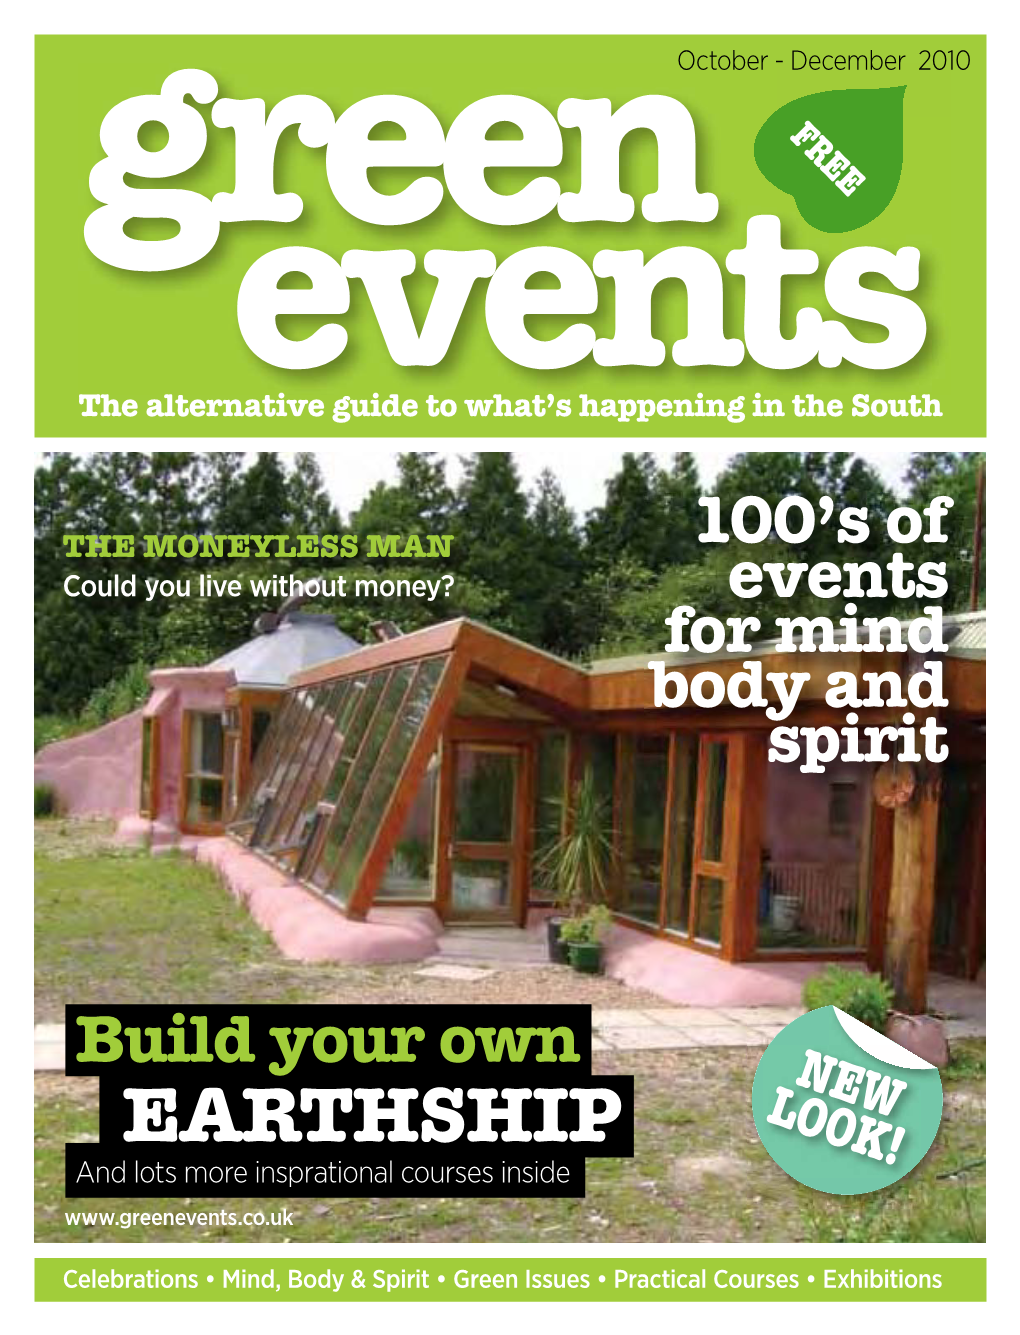 EARTHSHIP Lots More Insprational Courses Inside